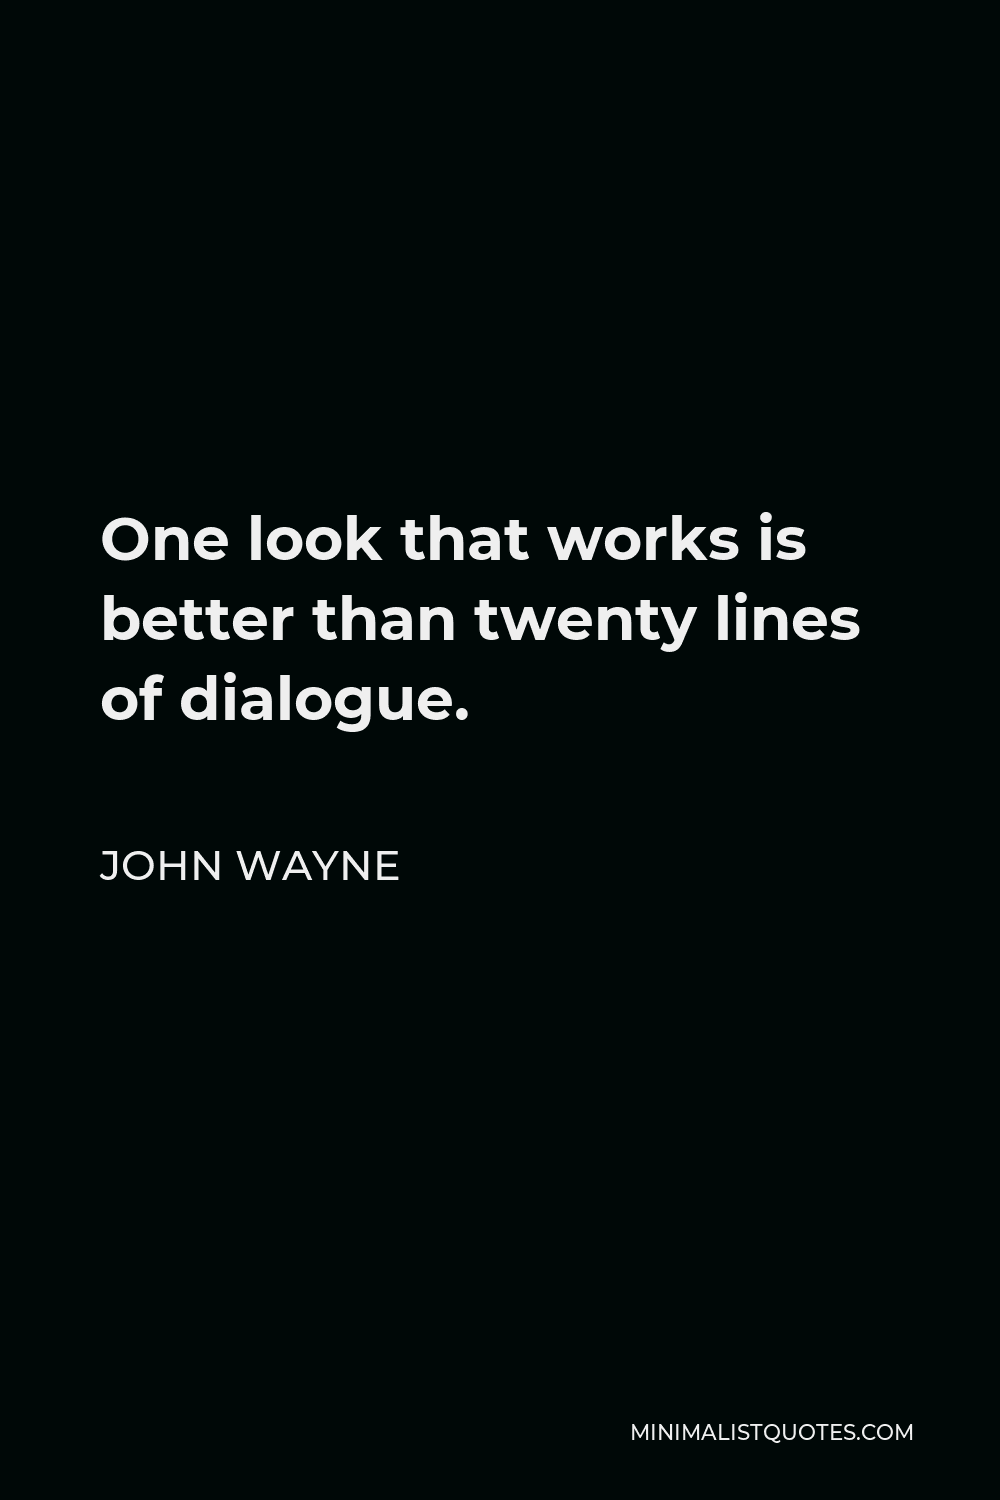 John Wayne Quote - One look that works is better than twenty lines of dialogue.